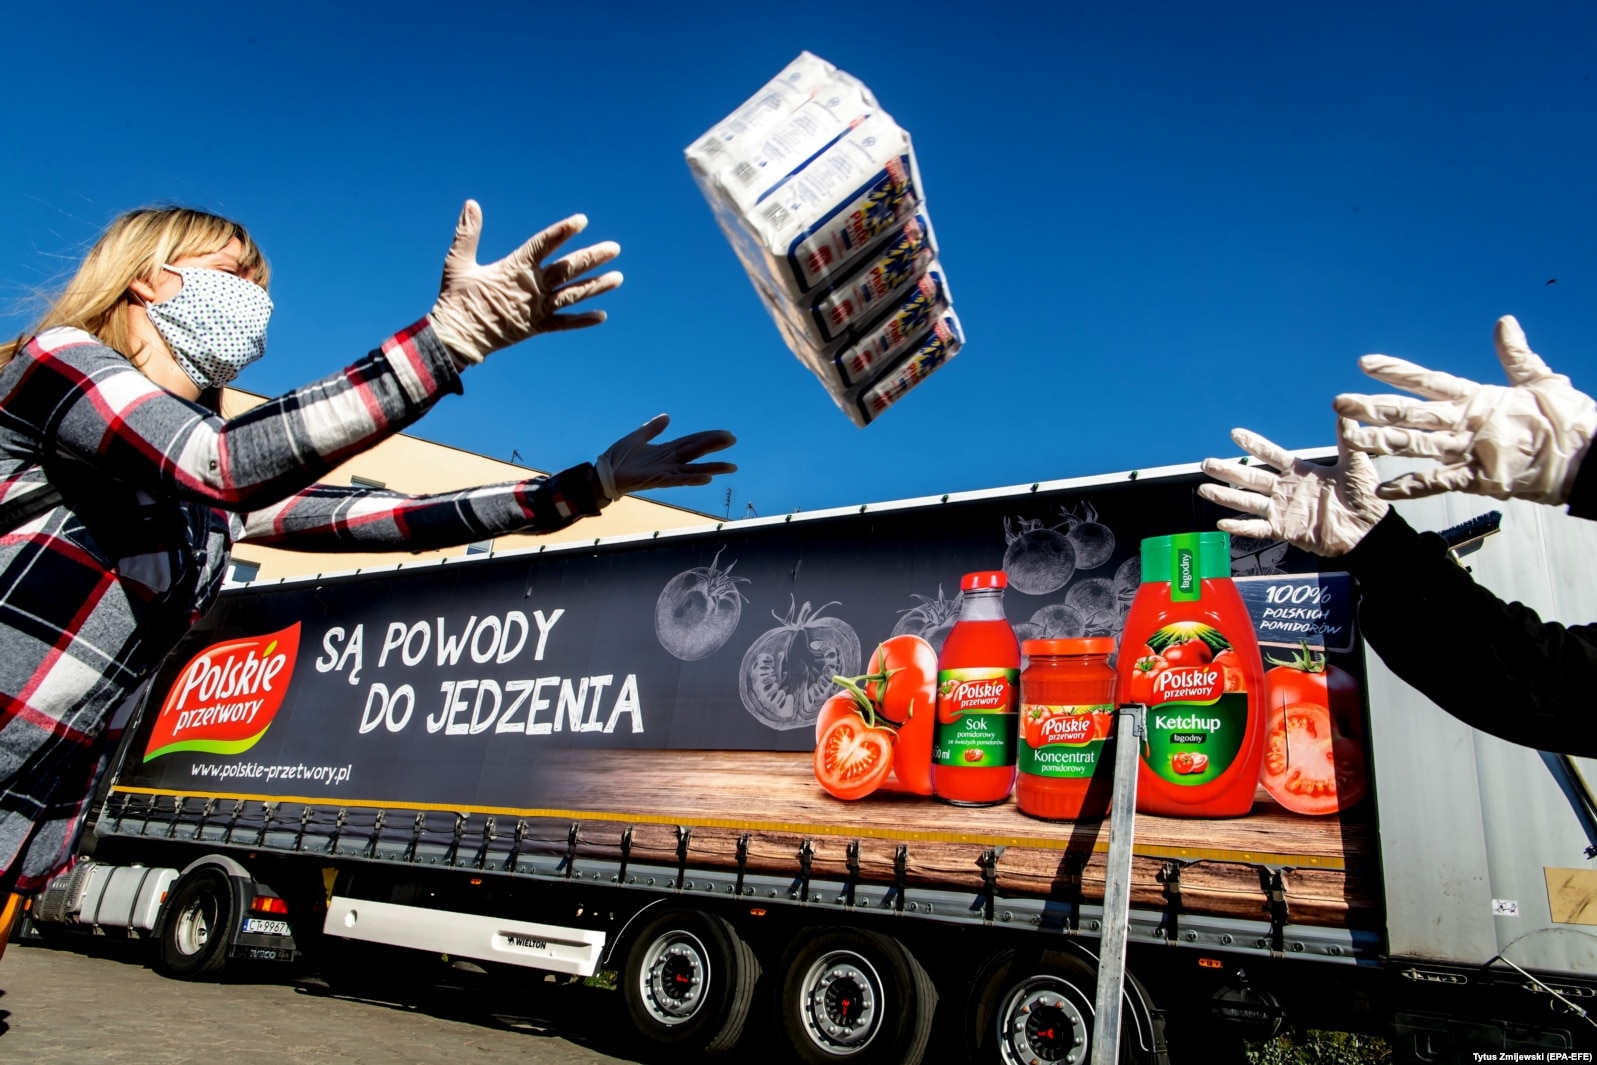 Workers load a truck with food aid in Bydgoszcz, Poland, on April 8. Two Polish companies, Polski Cukier and Polskie Przetwory, donated food products to help those most in need because of the coronavirus pandemic.